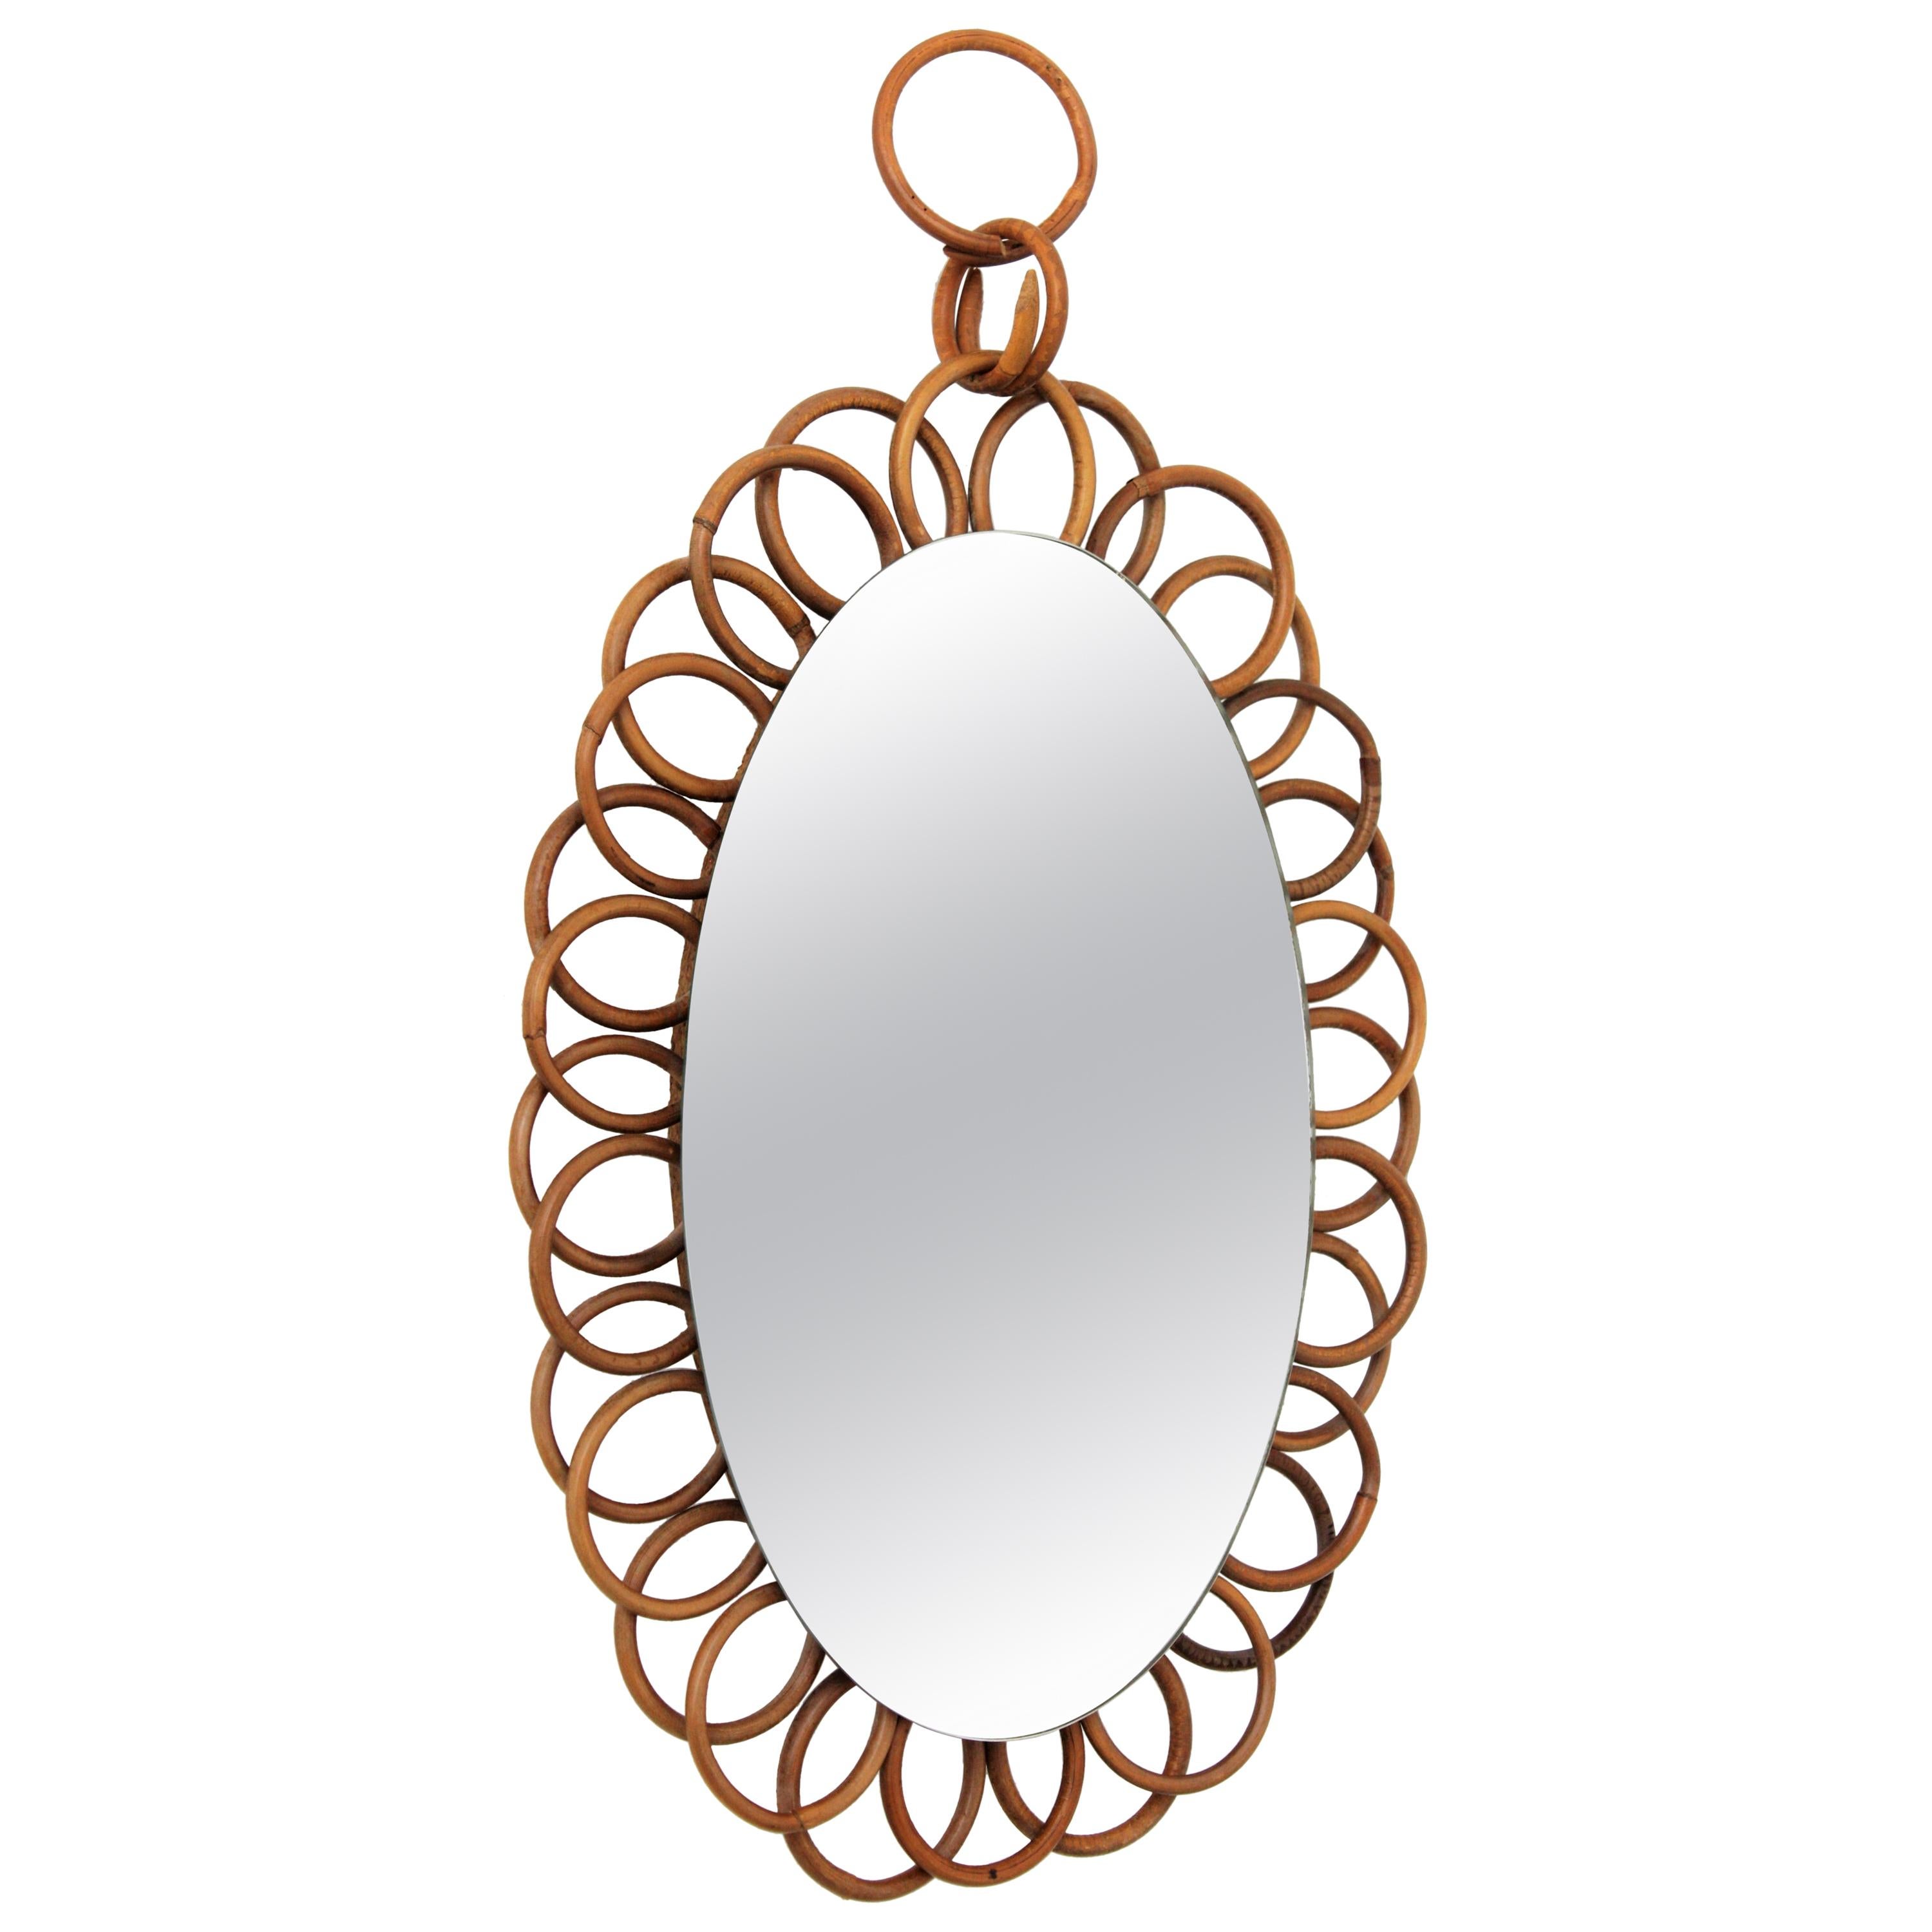 French Riviera rattan flower sunburst hanging wall oval mirror
A lovely handcrafted rattan flower shaped rattan oval mirror hanging from a rattan chain. This piece has all the taste of the Mid-Century Modern Mediterranean taste, France,